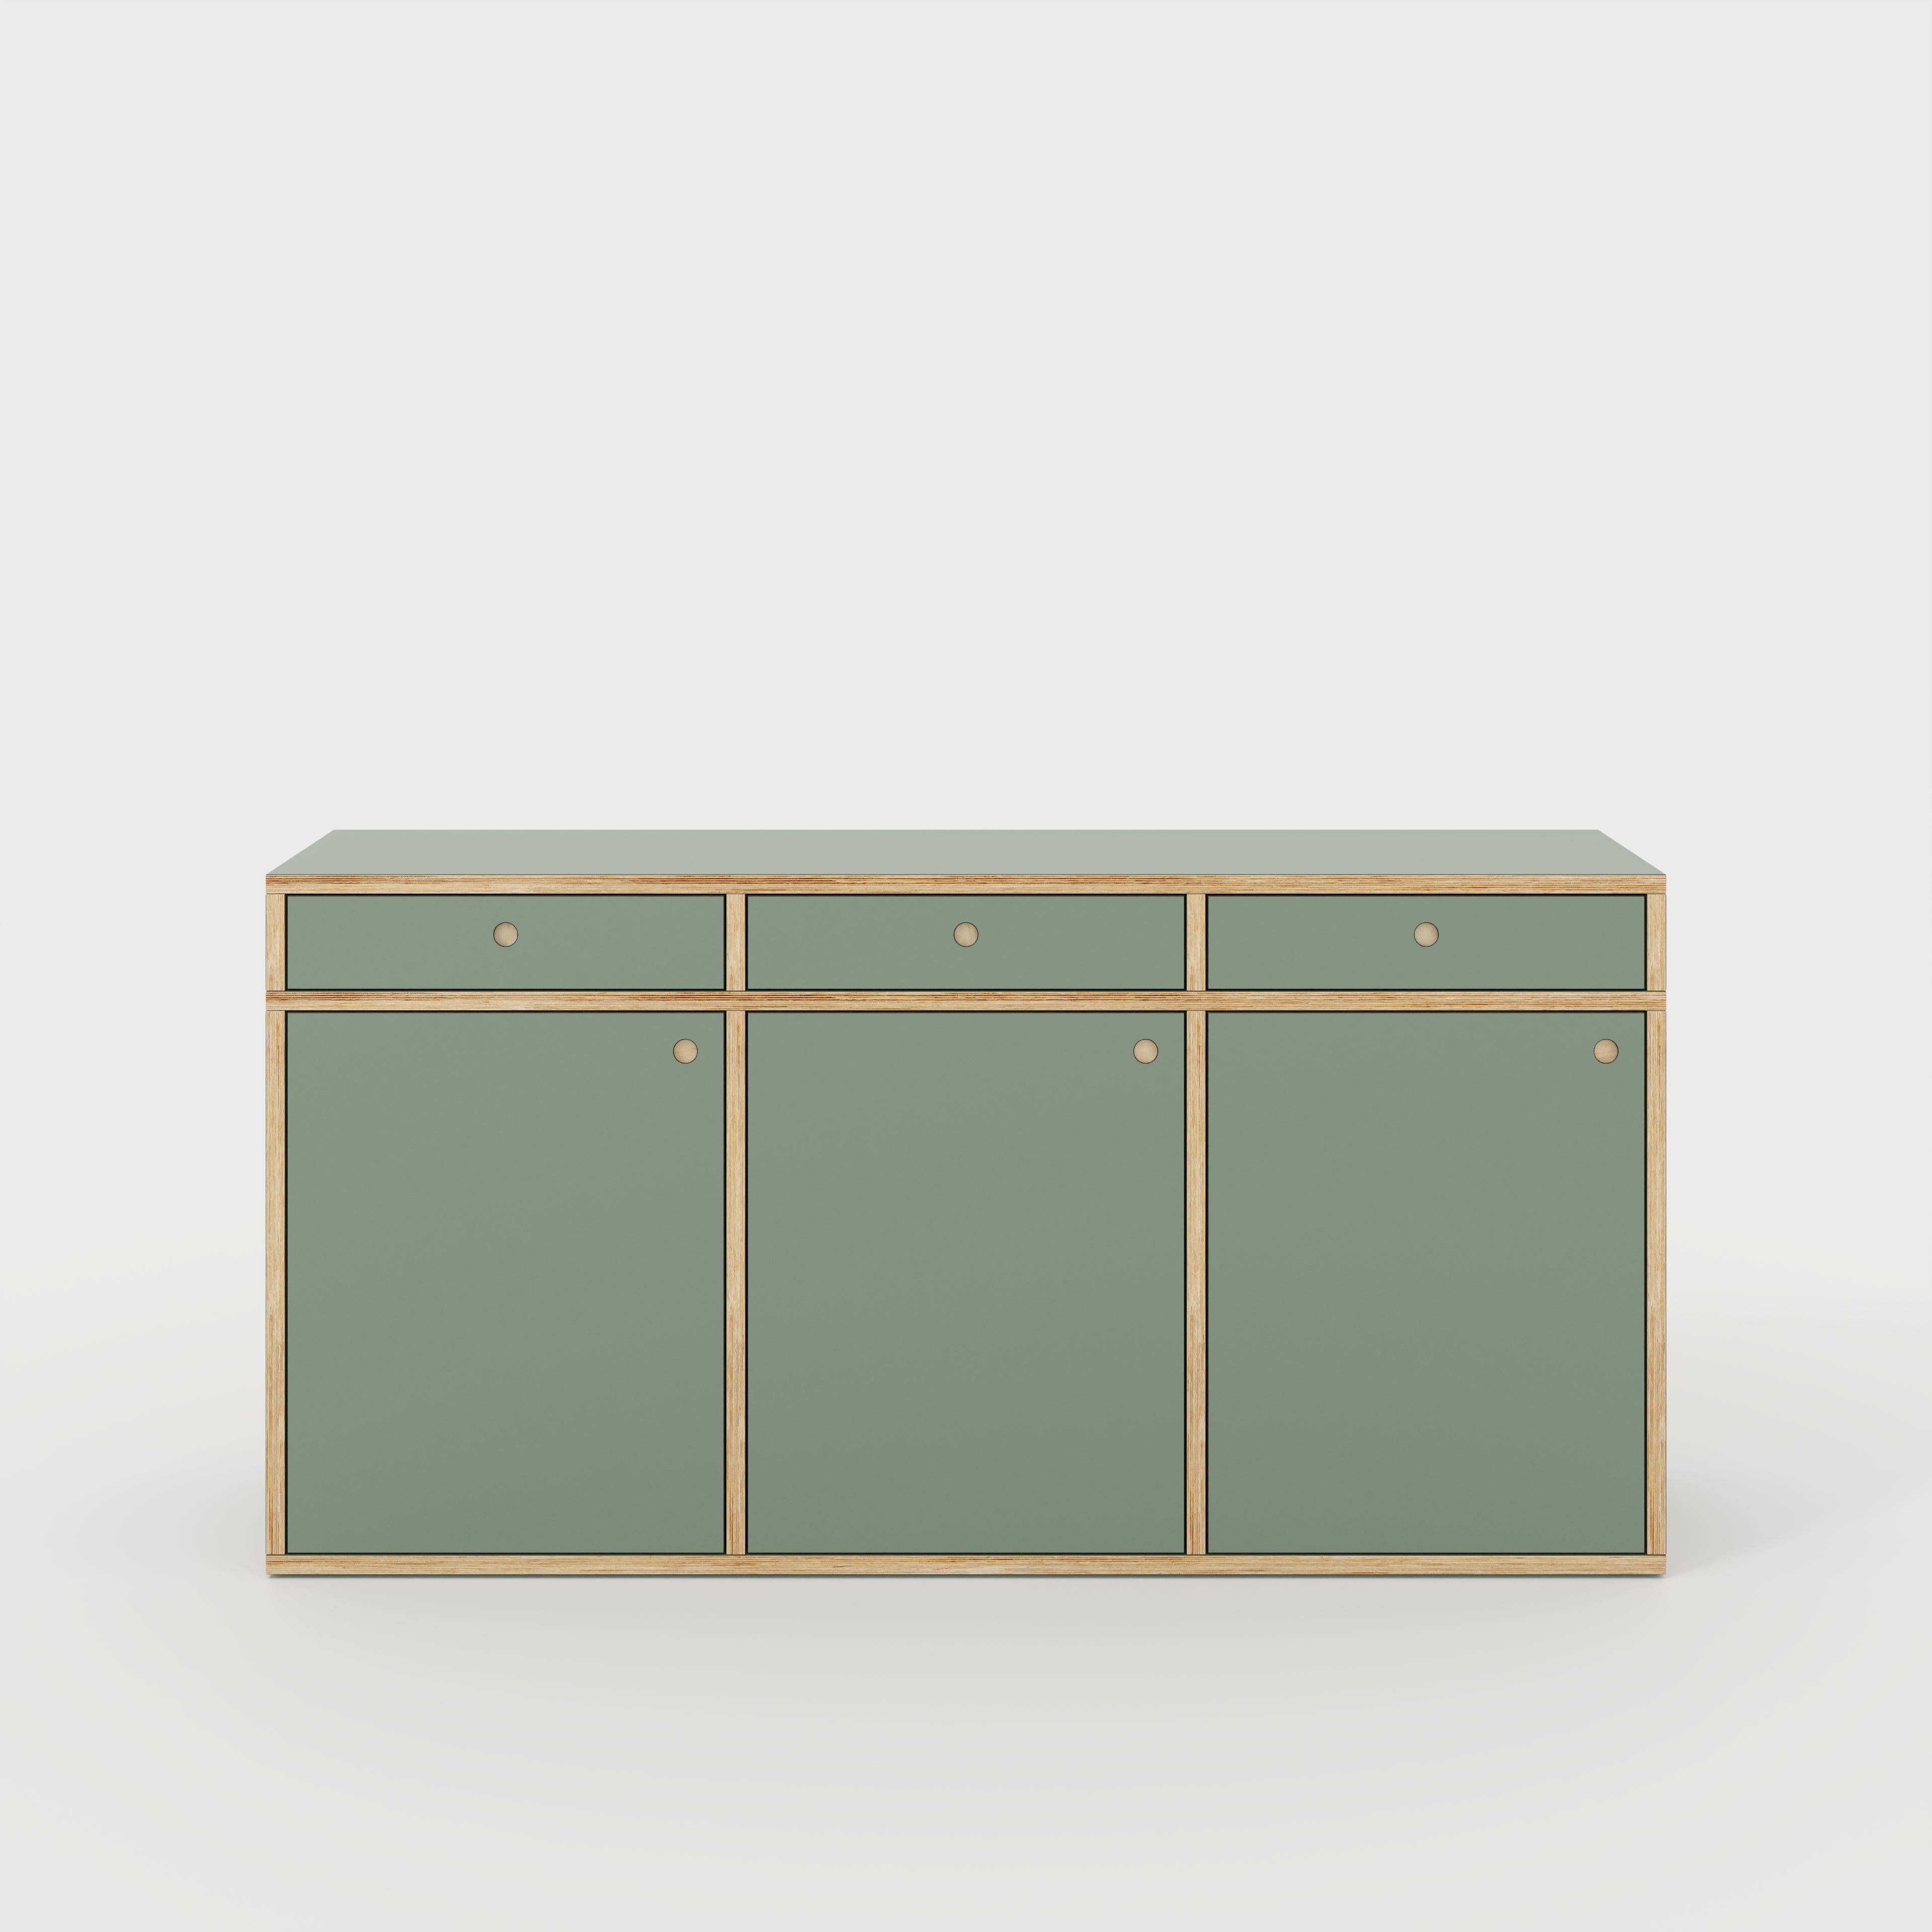 Sideboard - Type 1 - Formica Green Slate - 1800(w) x 400(d) x 900(h)